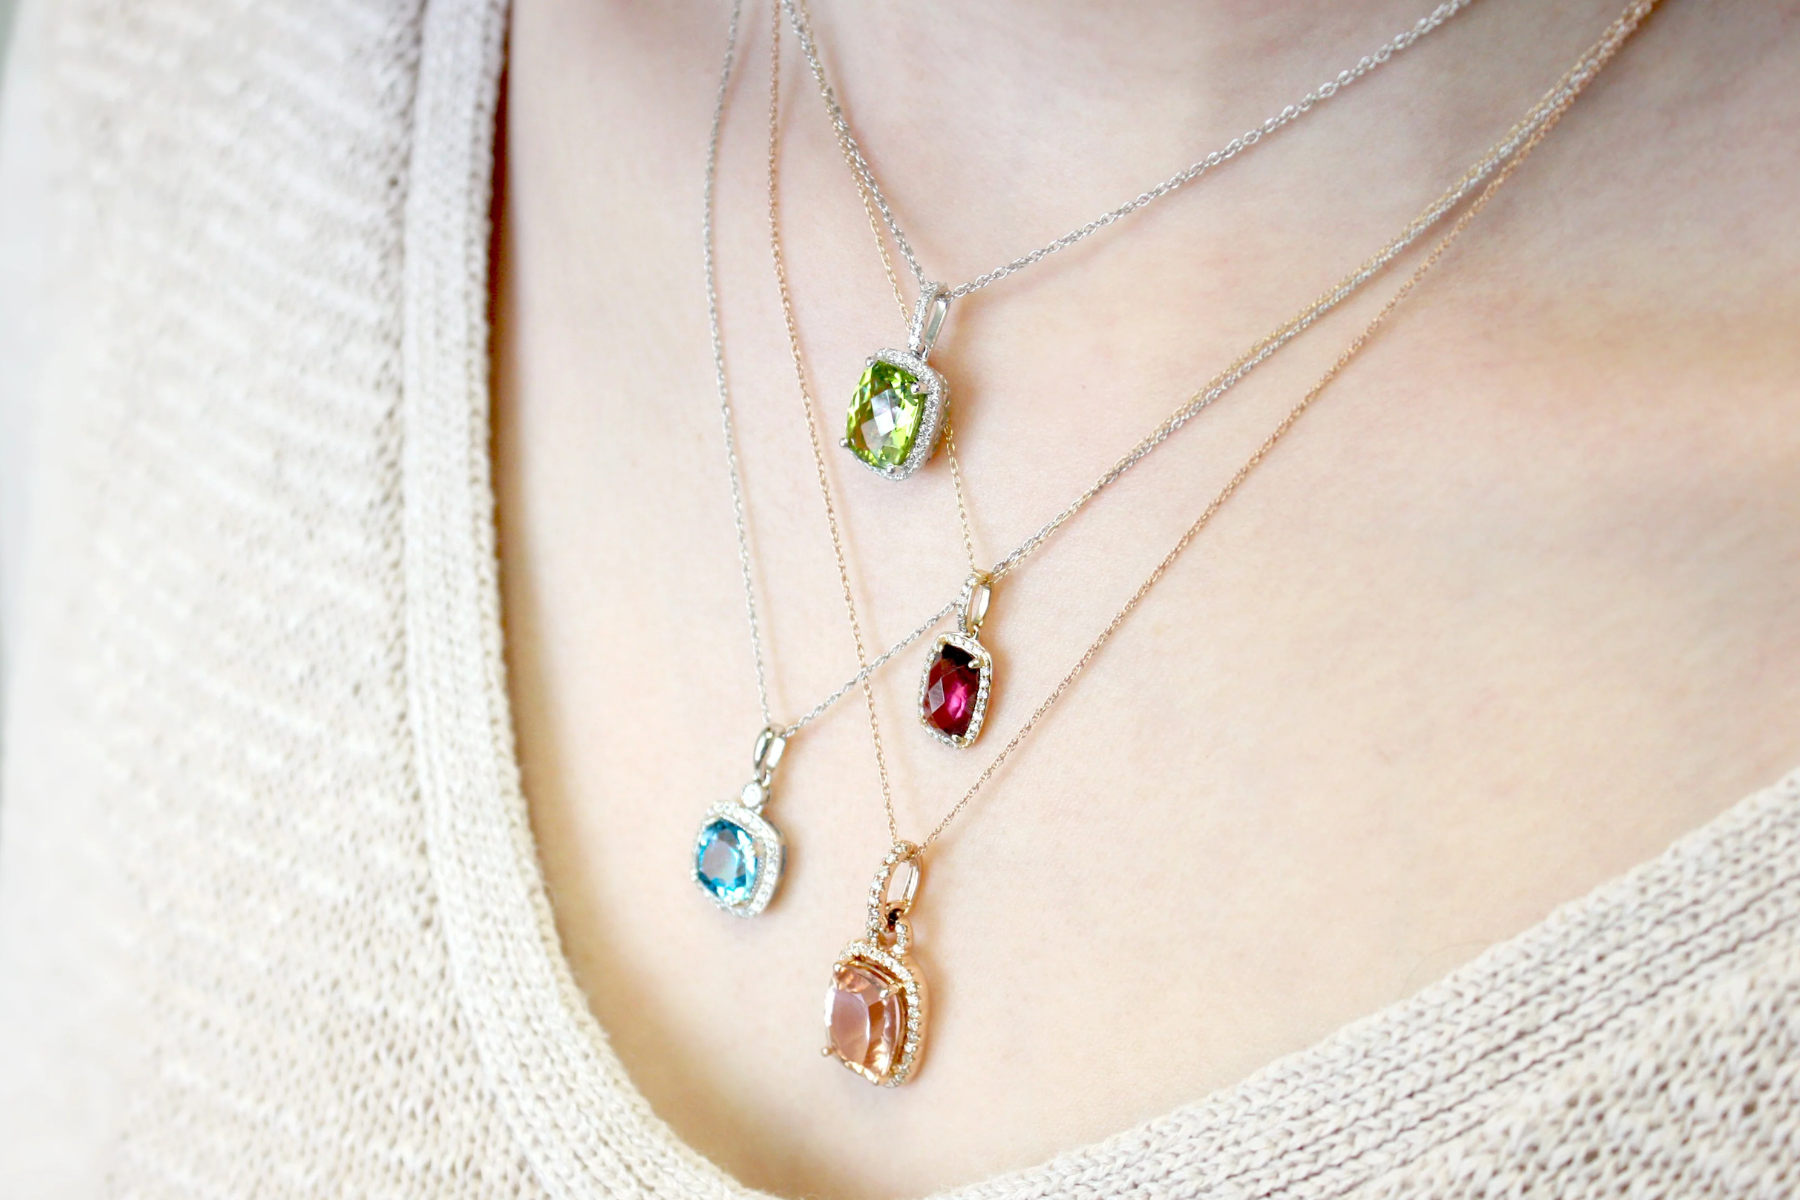 The image depicts a woman adorned with four necklaces, each featuring a different birthstone